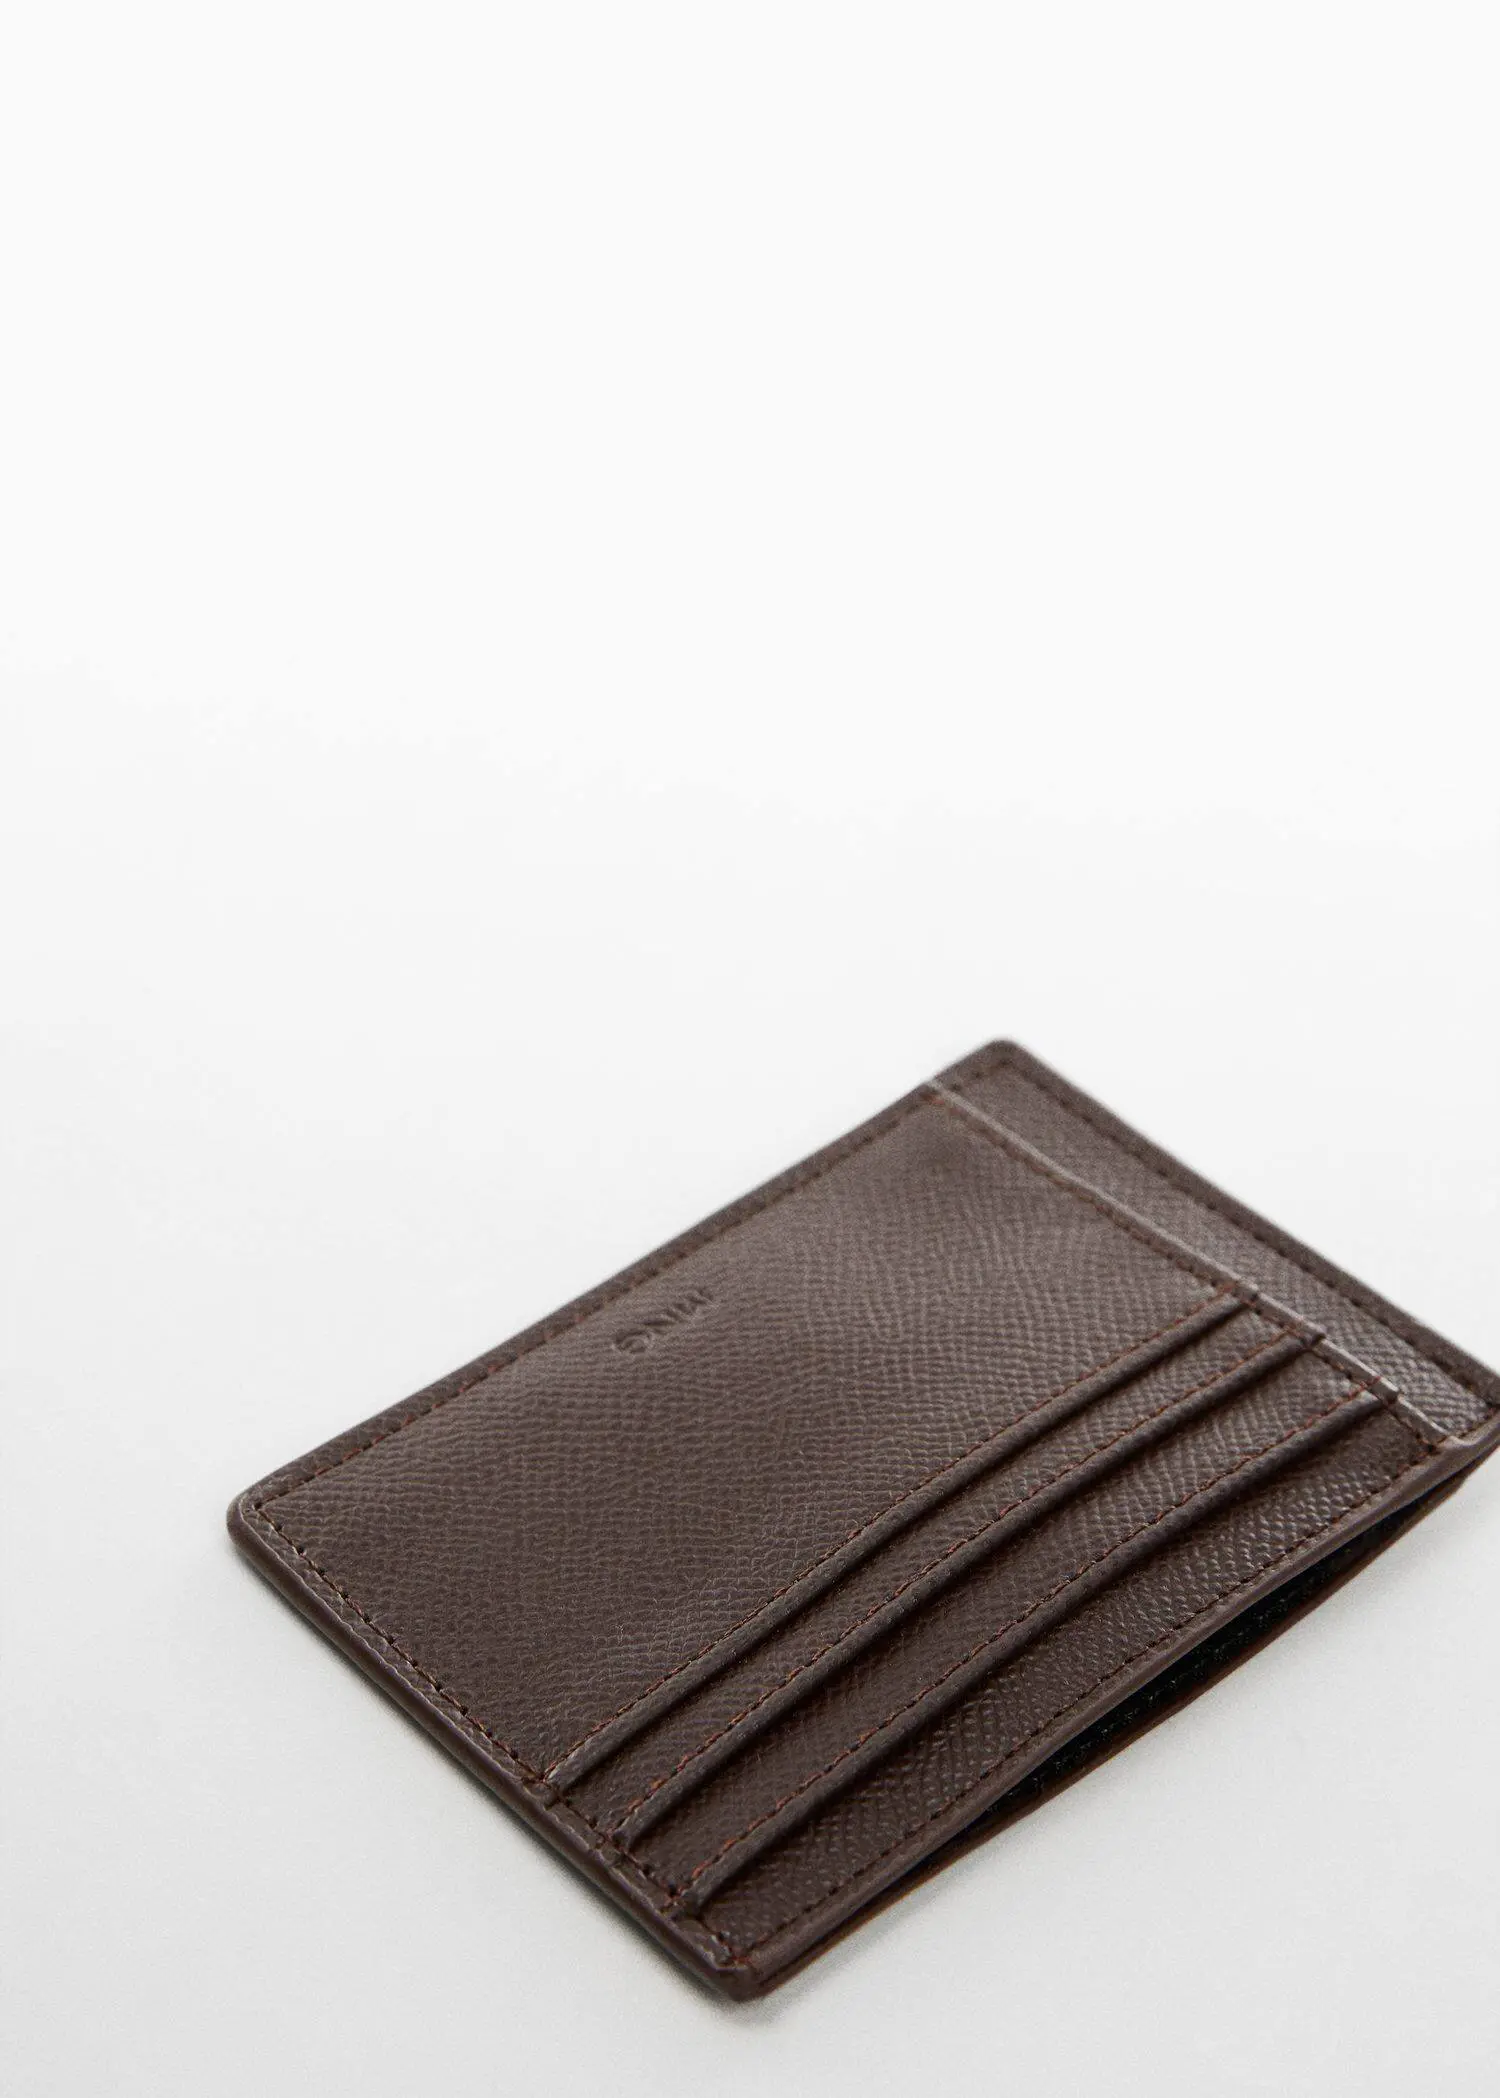 Mango Anti-contactless peaked card holder. 2